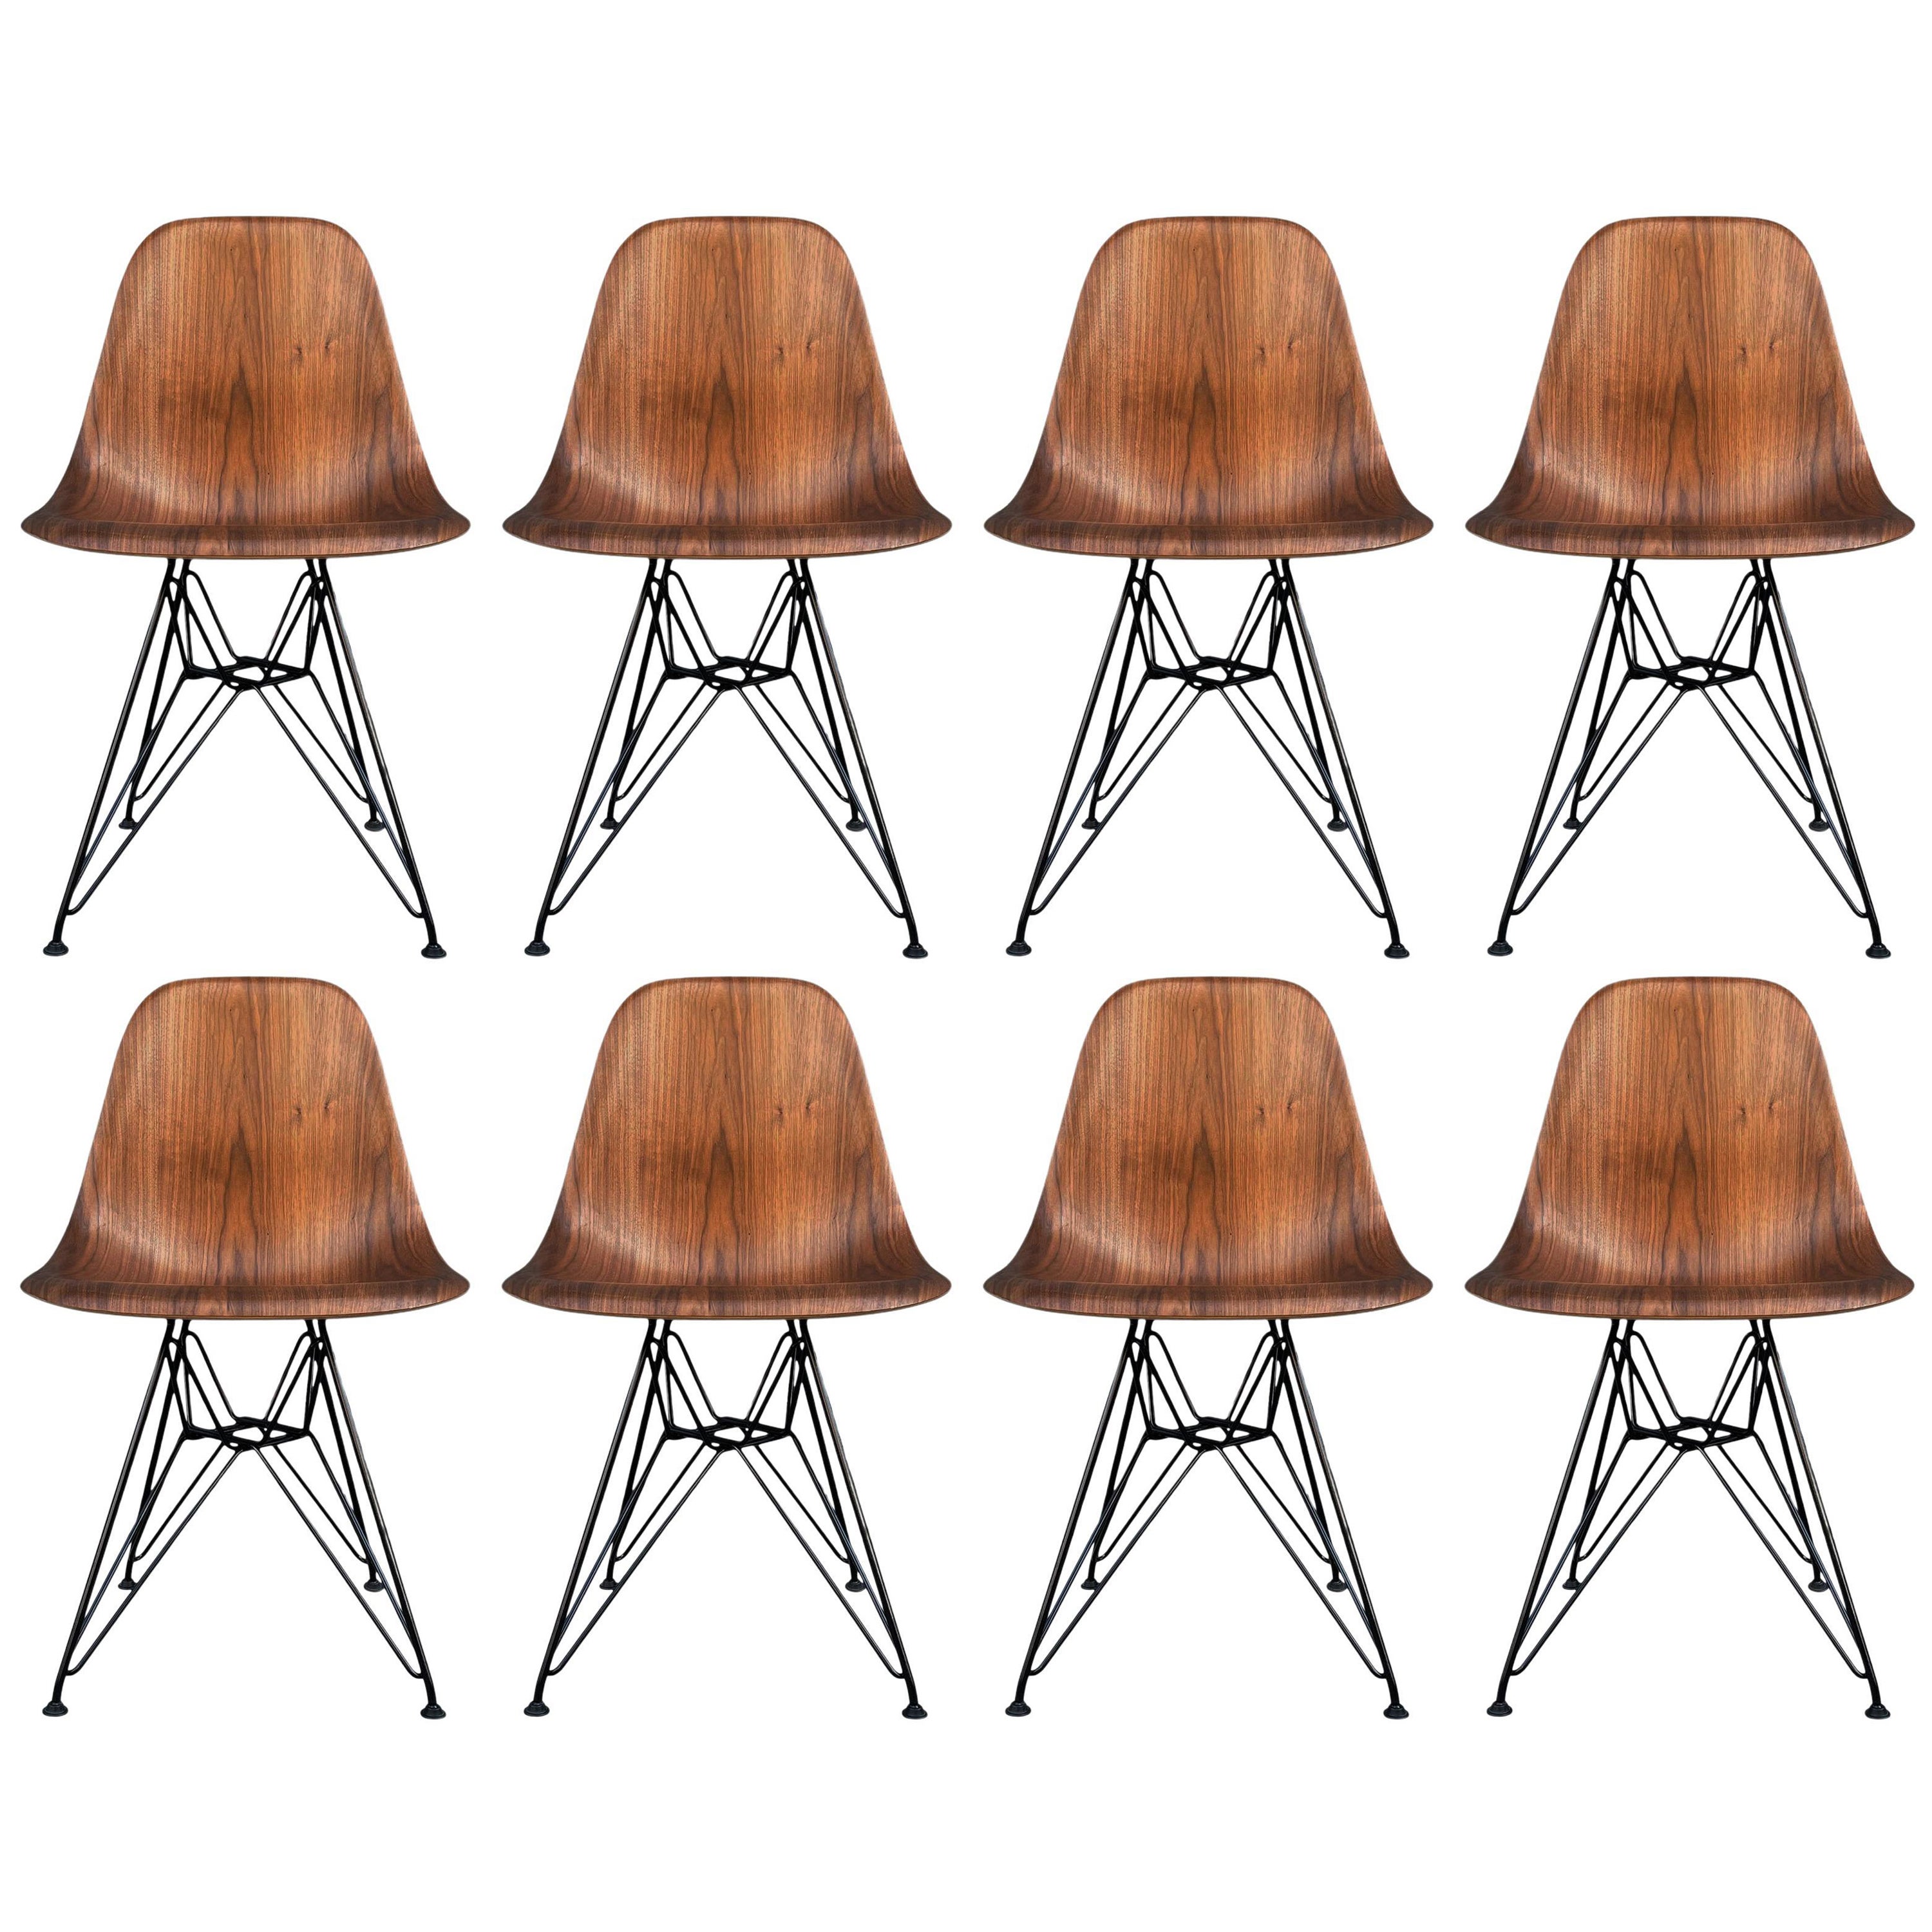 Is Eames mid-century modern?